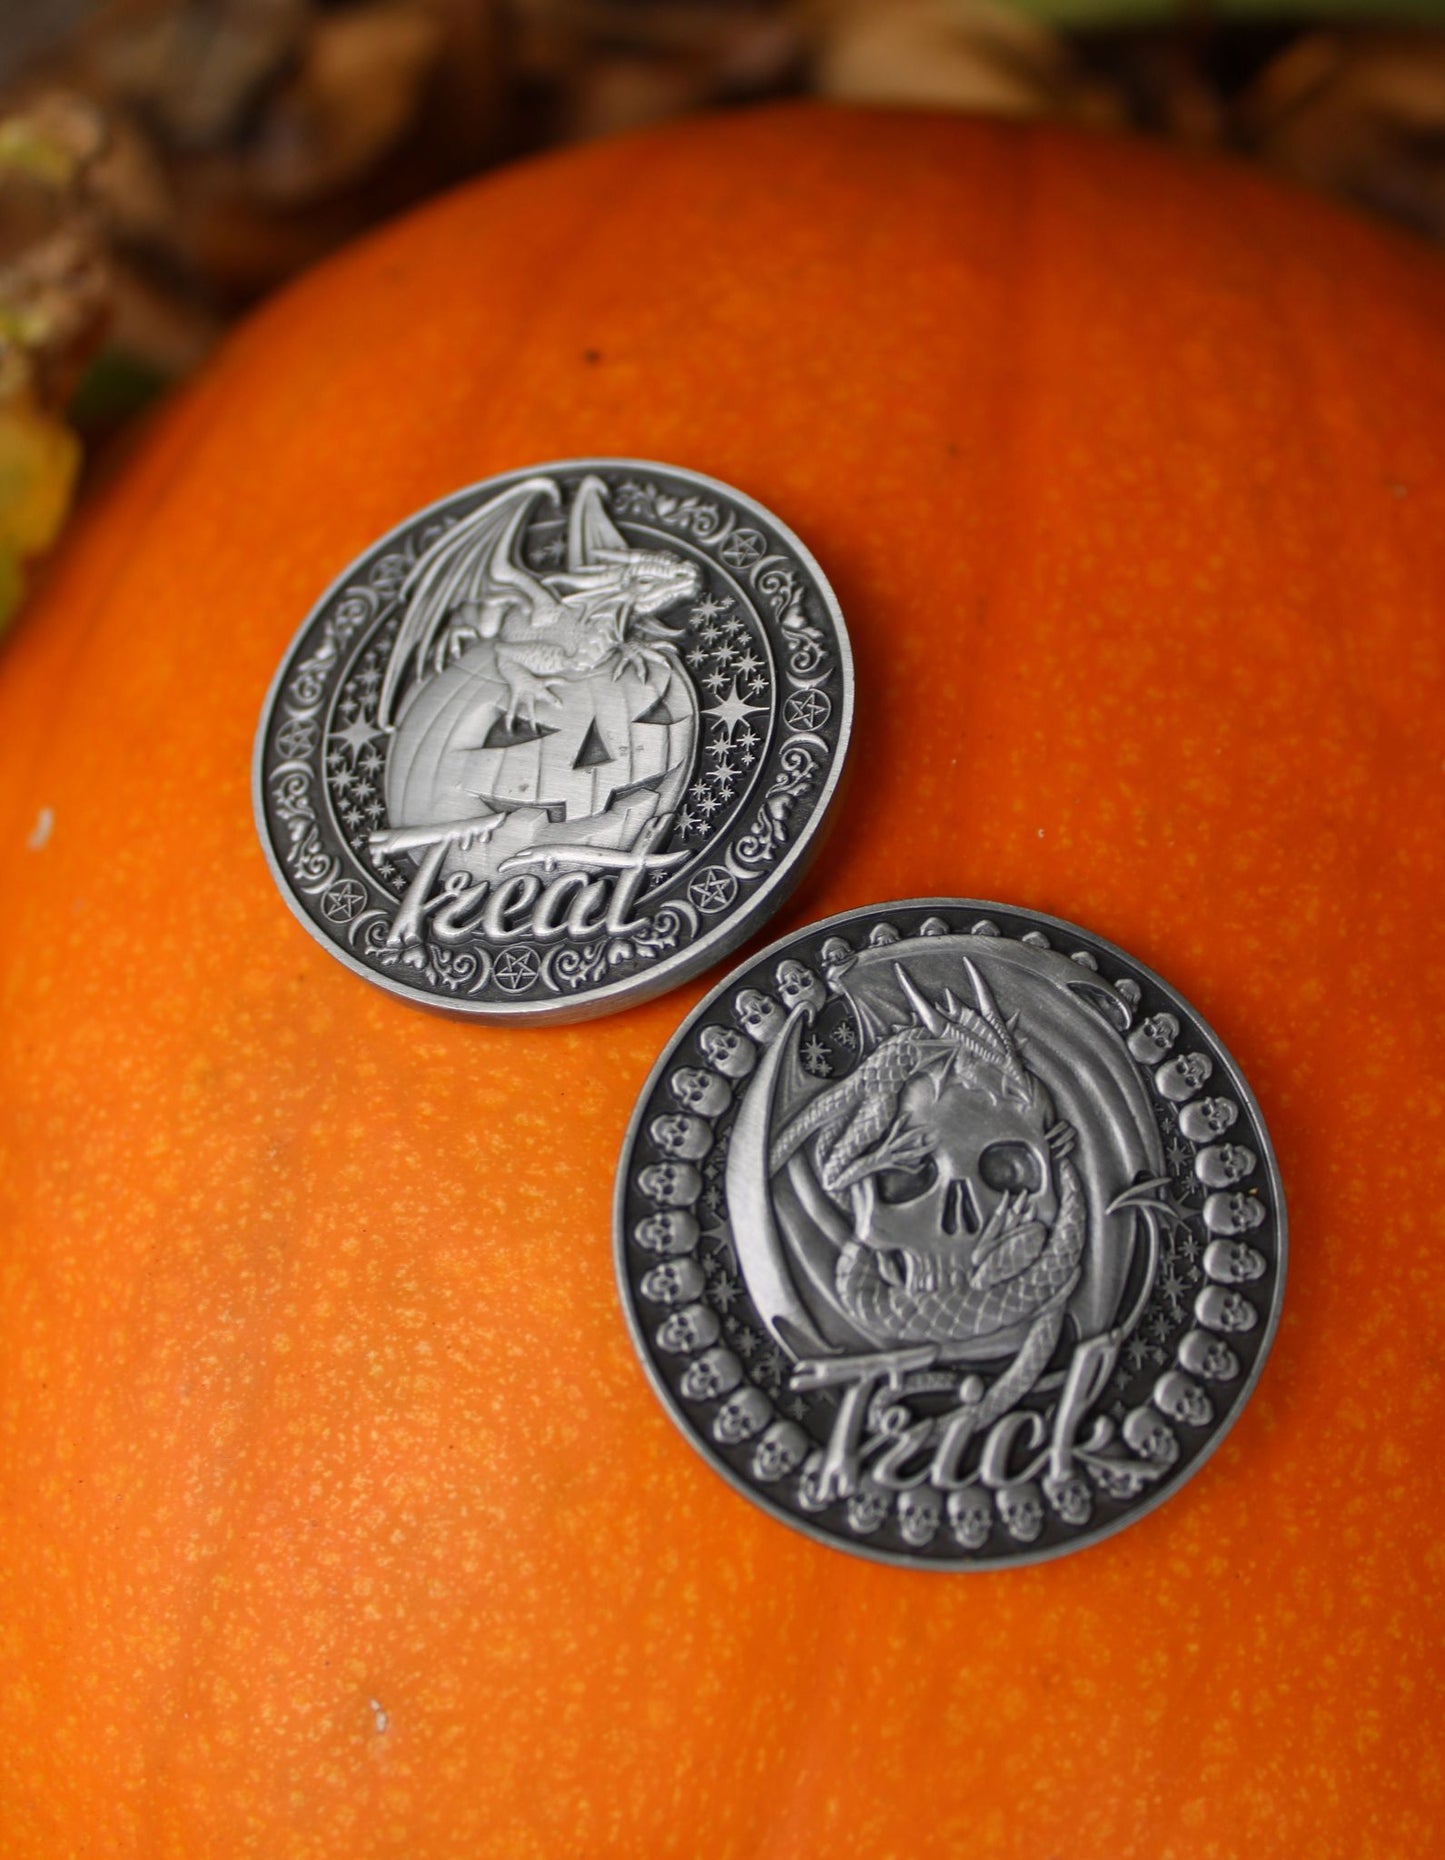 Trick or Treat Collectible Coin af Anne Stokes